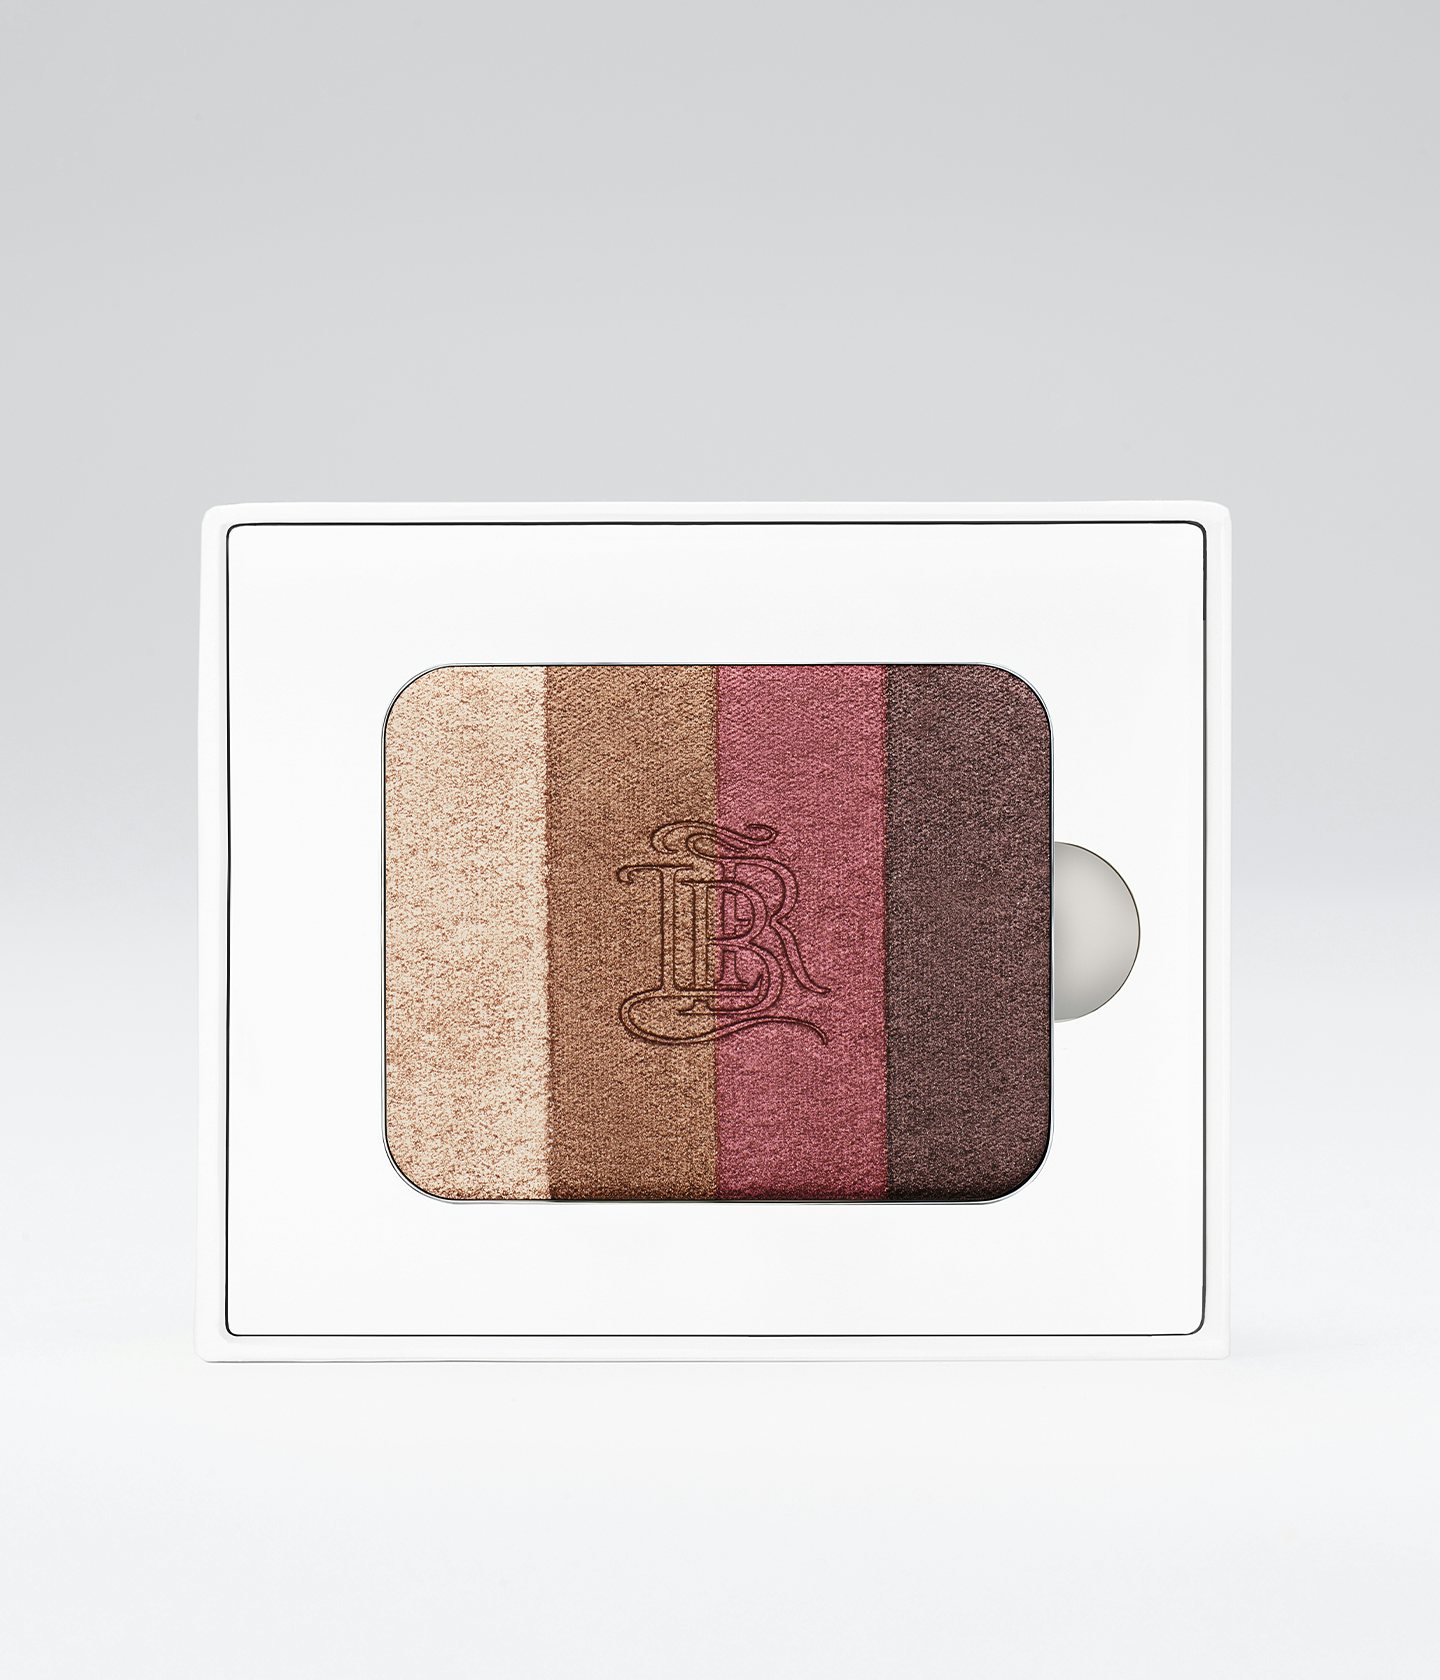 La bouche rouge les Ombres Chilwa eyeshadow palette in the white paper case